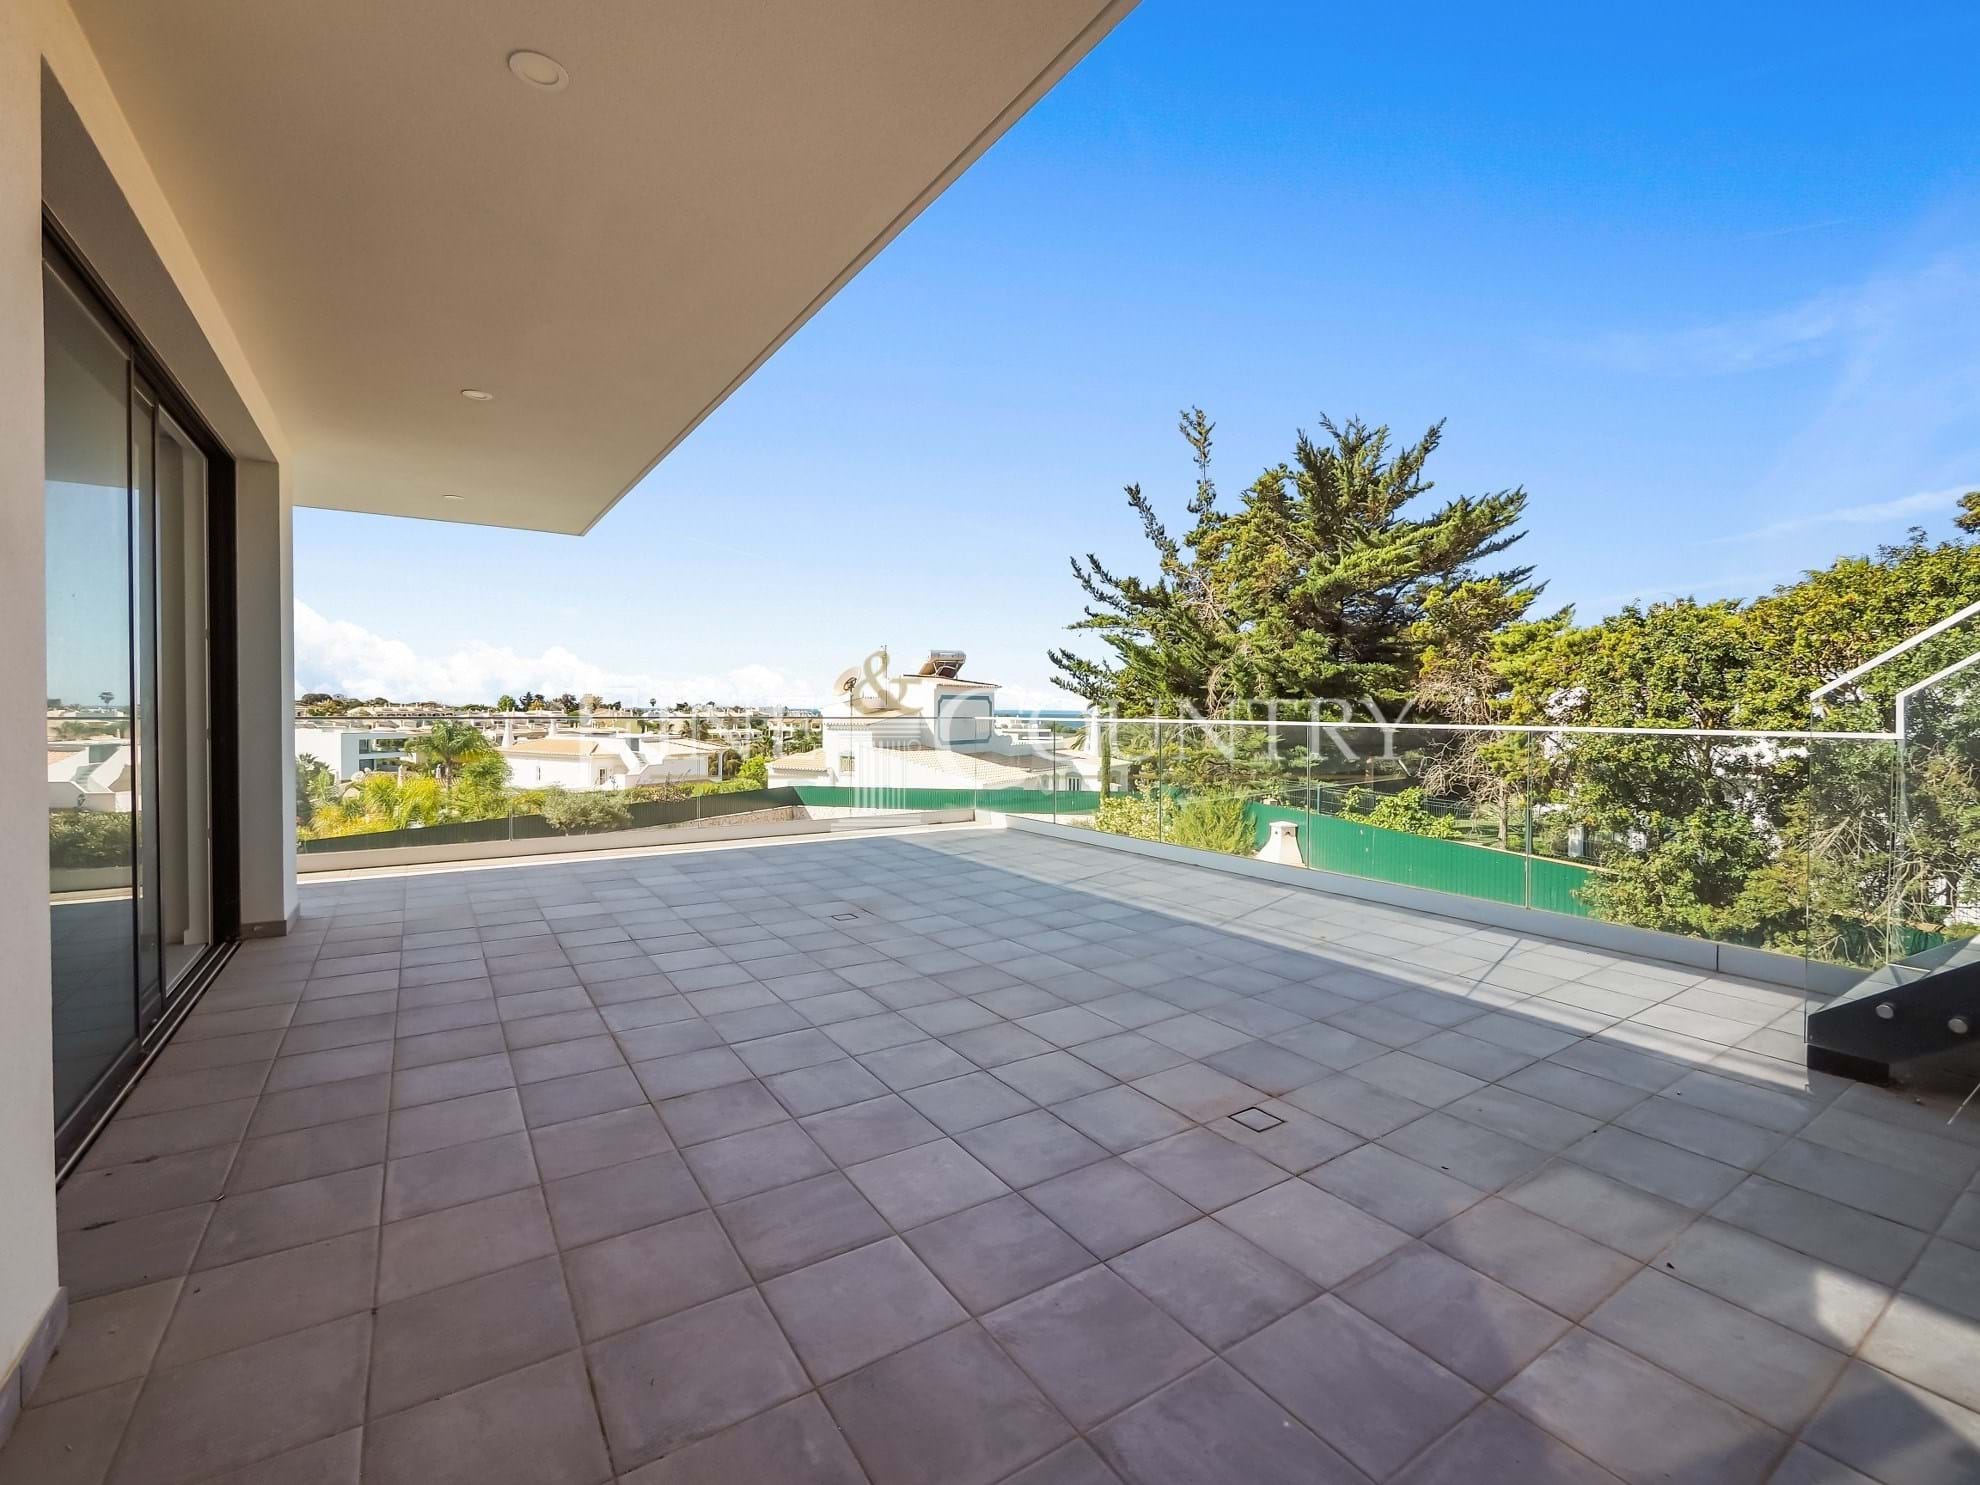 Photo of Ferragudo - Brand new 4-bedroom modern villa with pool, large garage and sea views